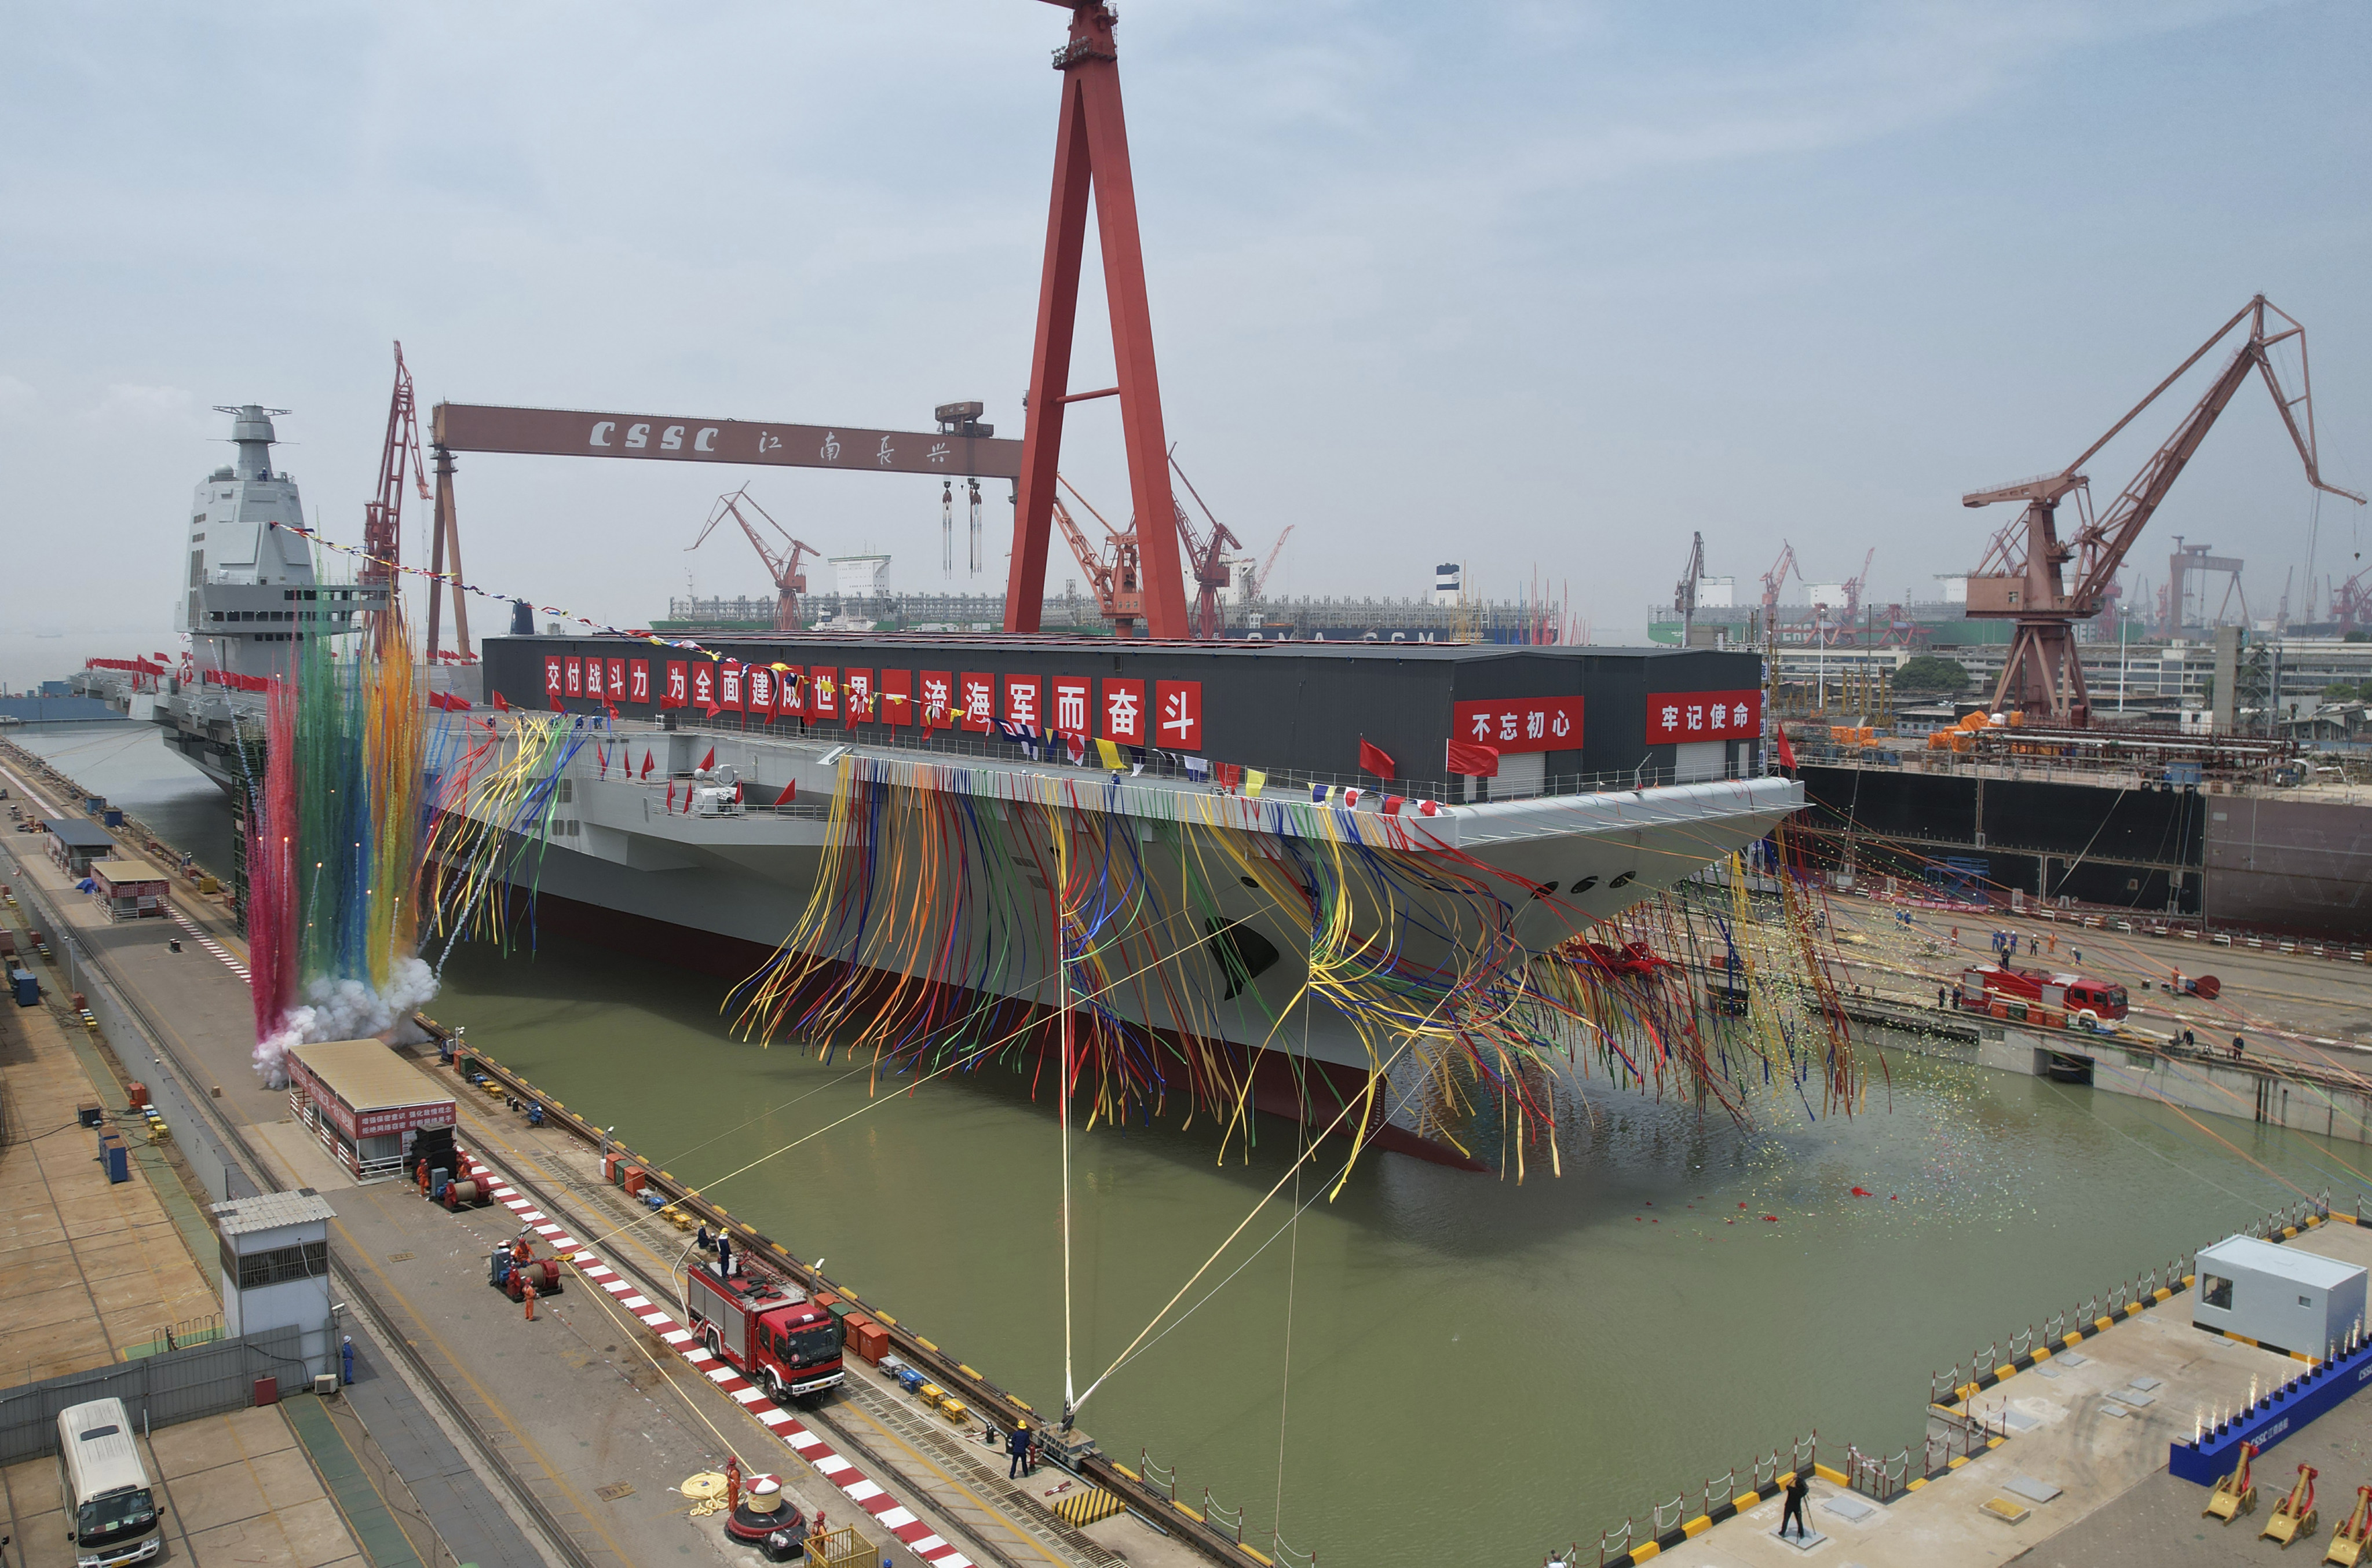 A launch ceremony is held for China’s latest and most advanced aircraft carrier, Fujian, at a dock in Shanghai on June 17. Photo: Xinhua via AP